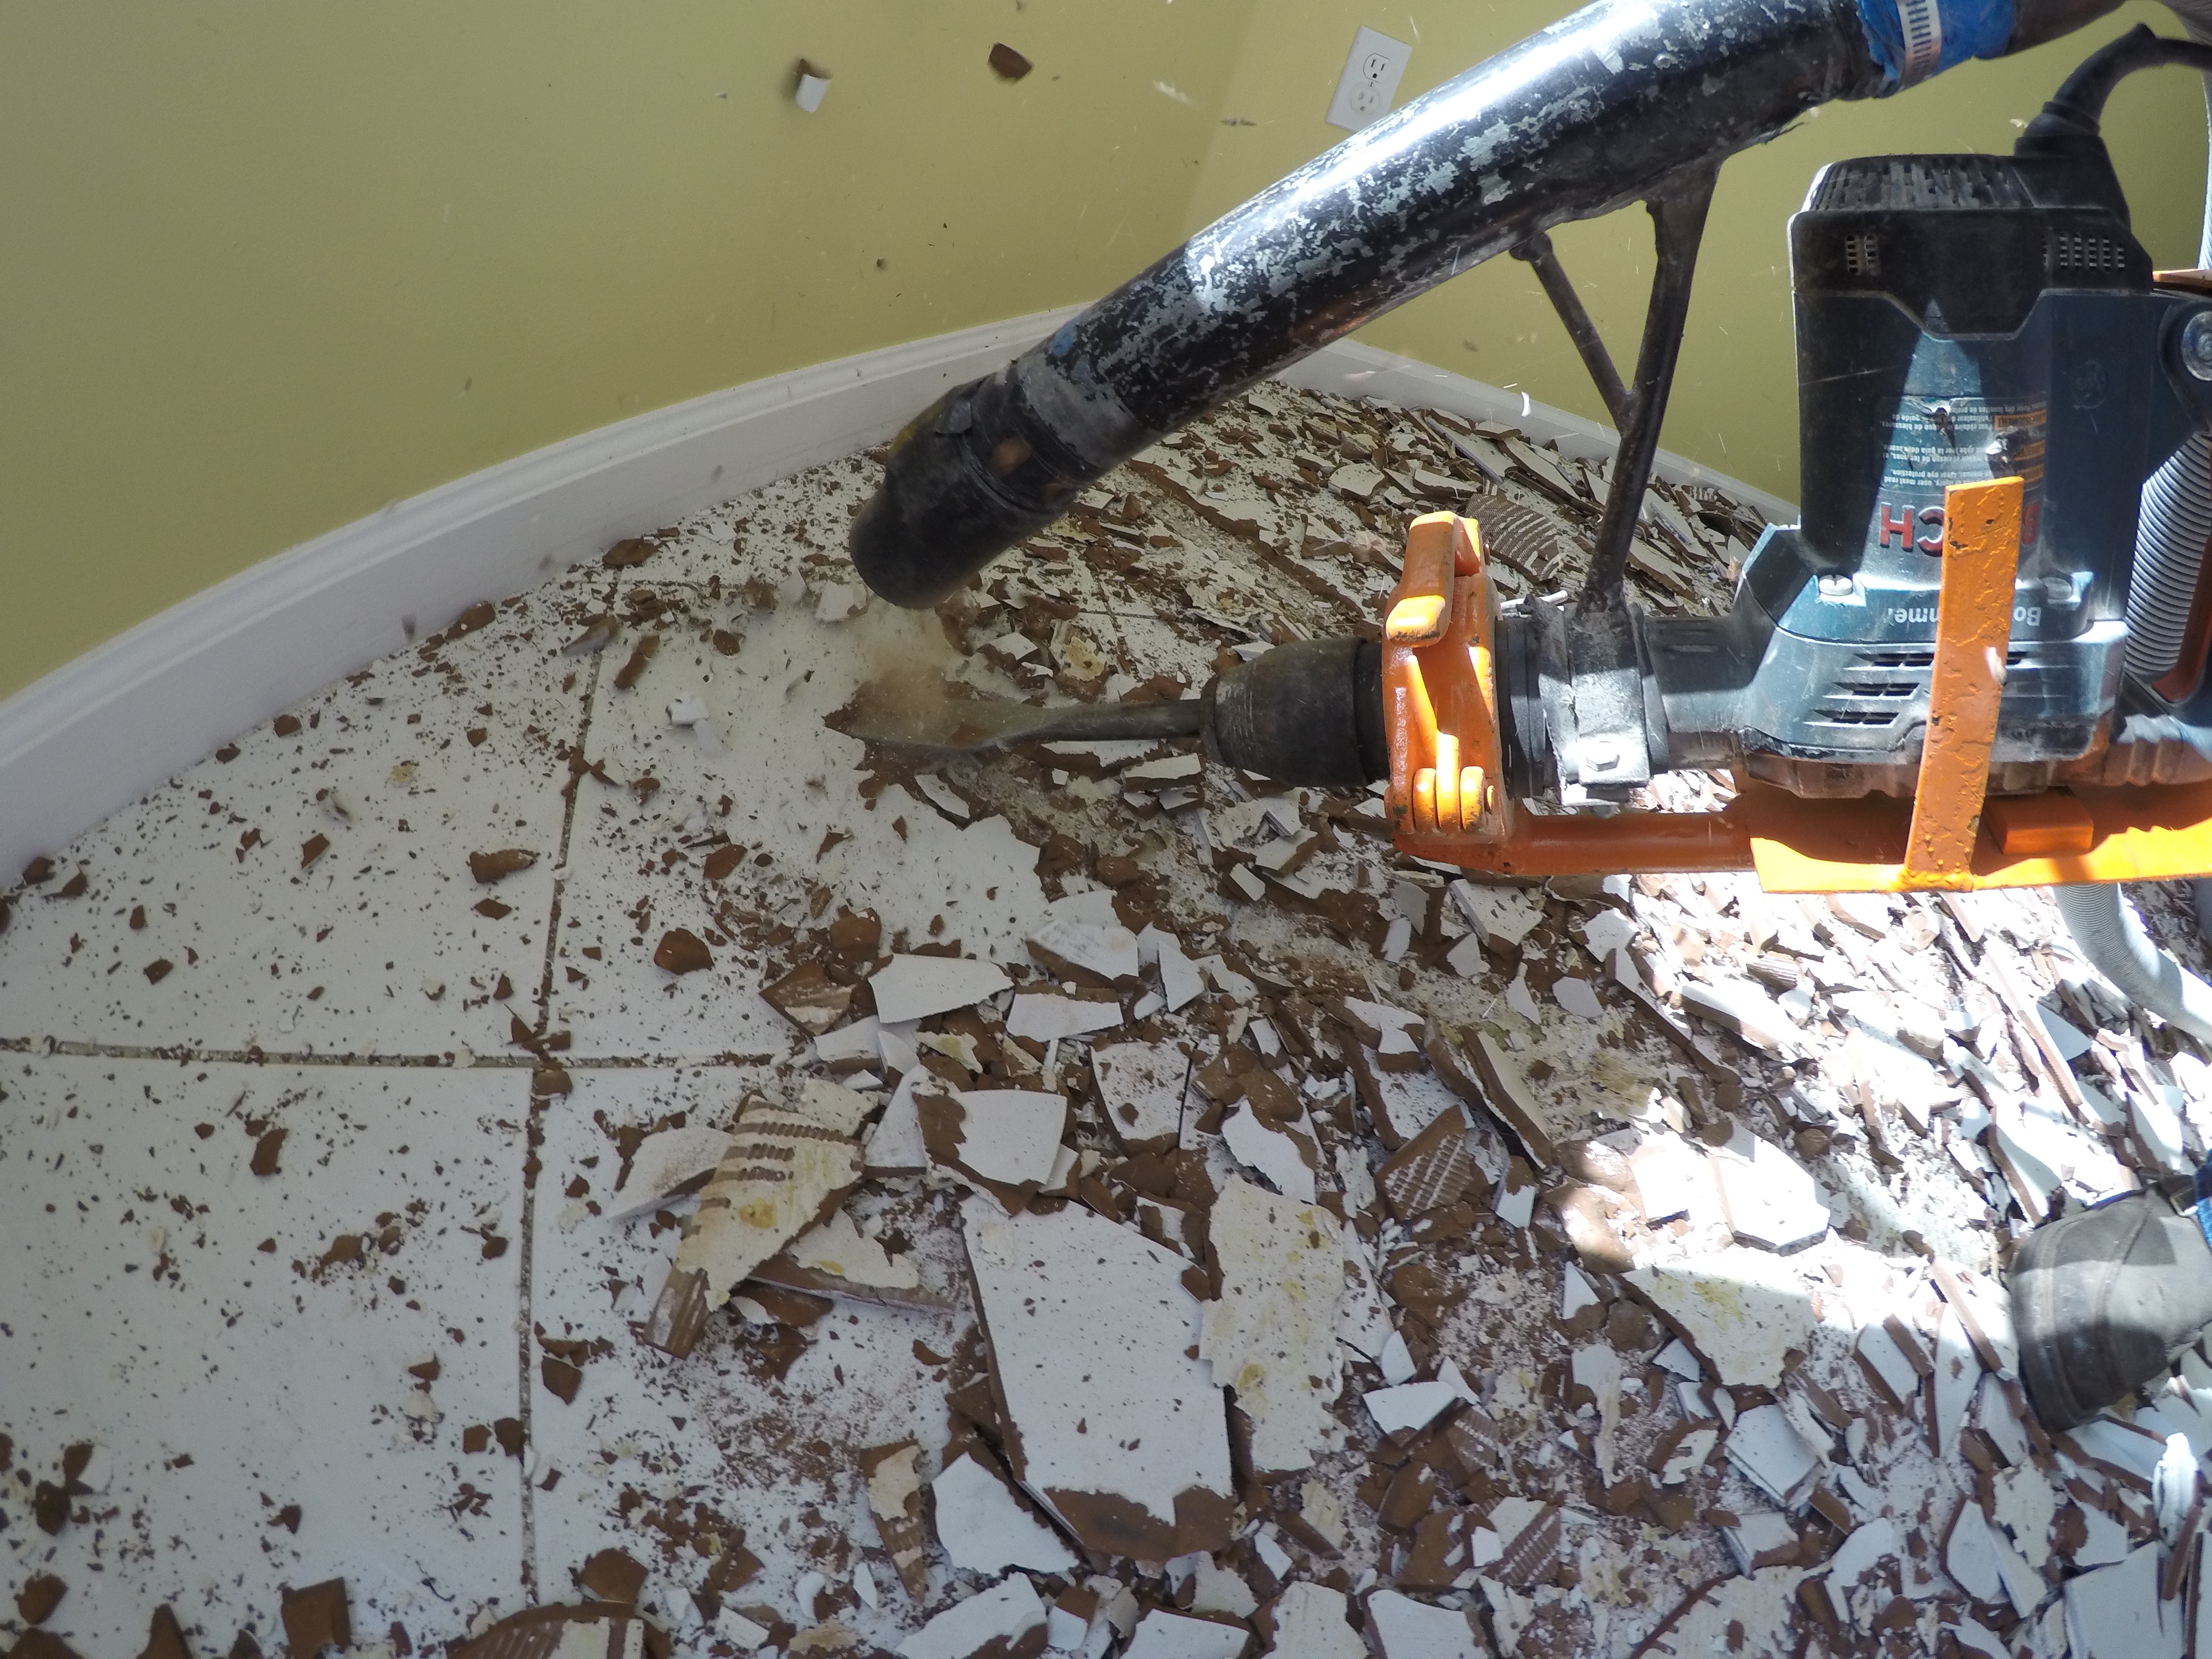 Image of tile flooring being broken up and removed